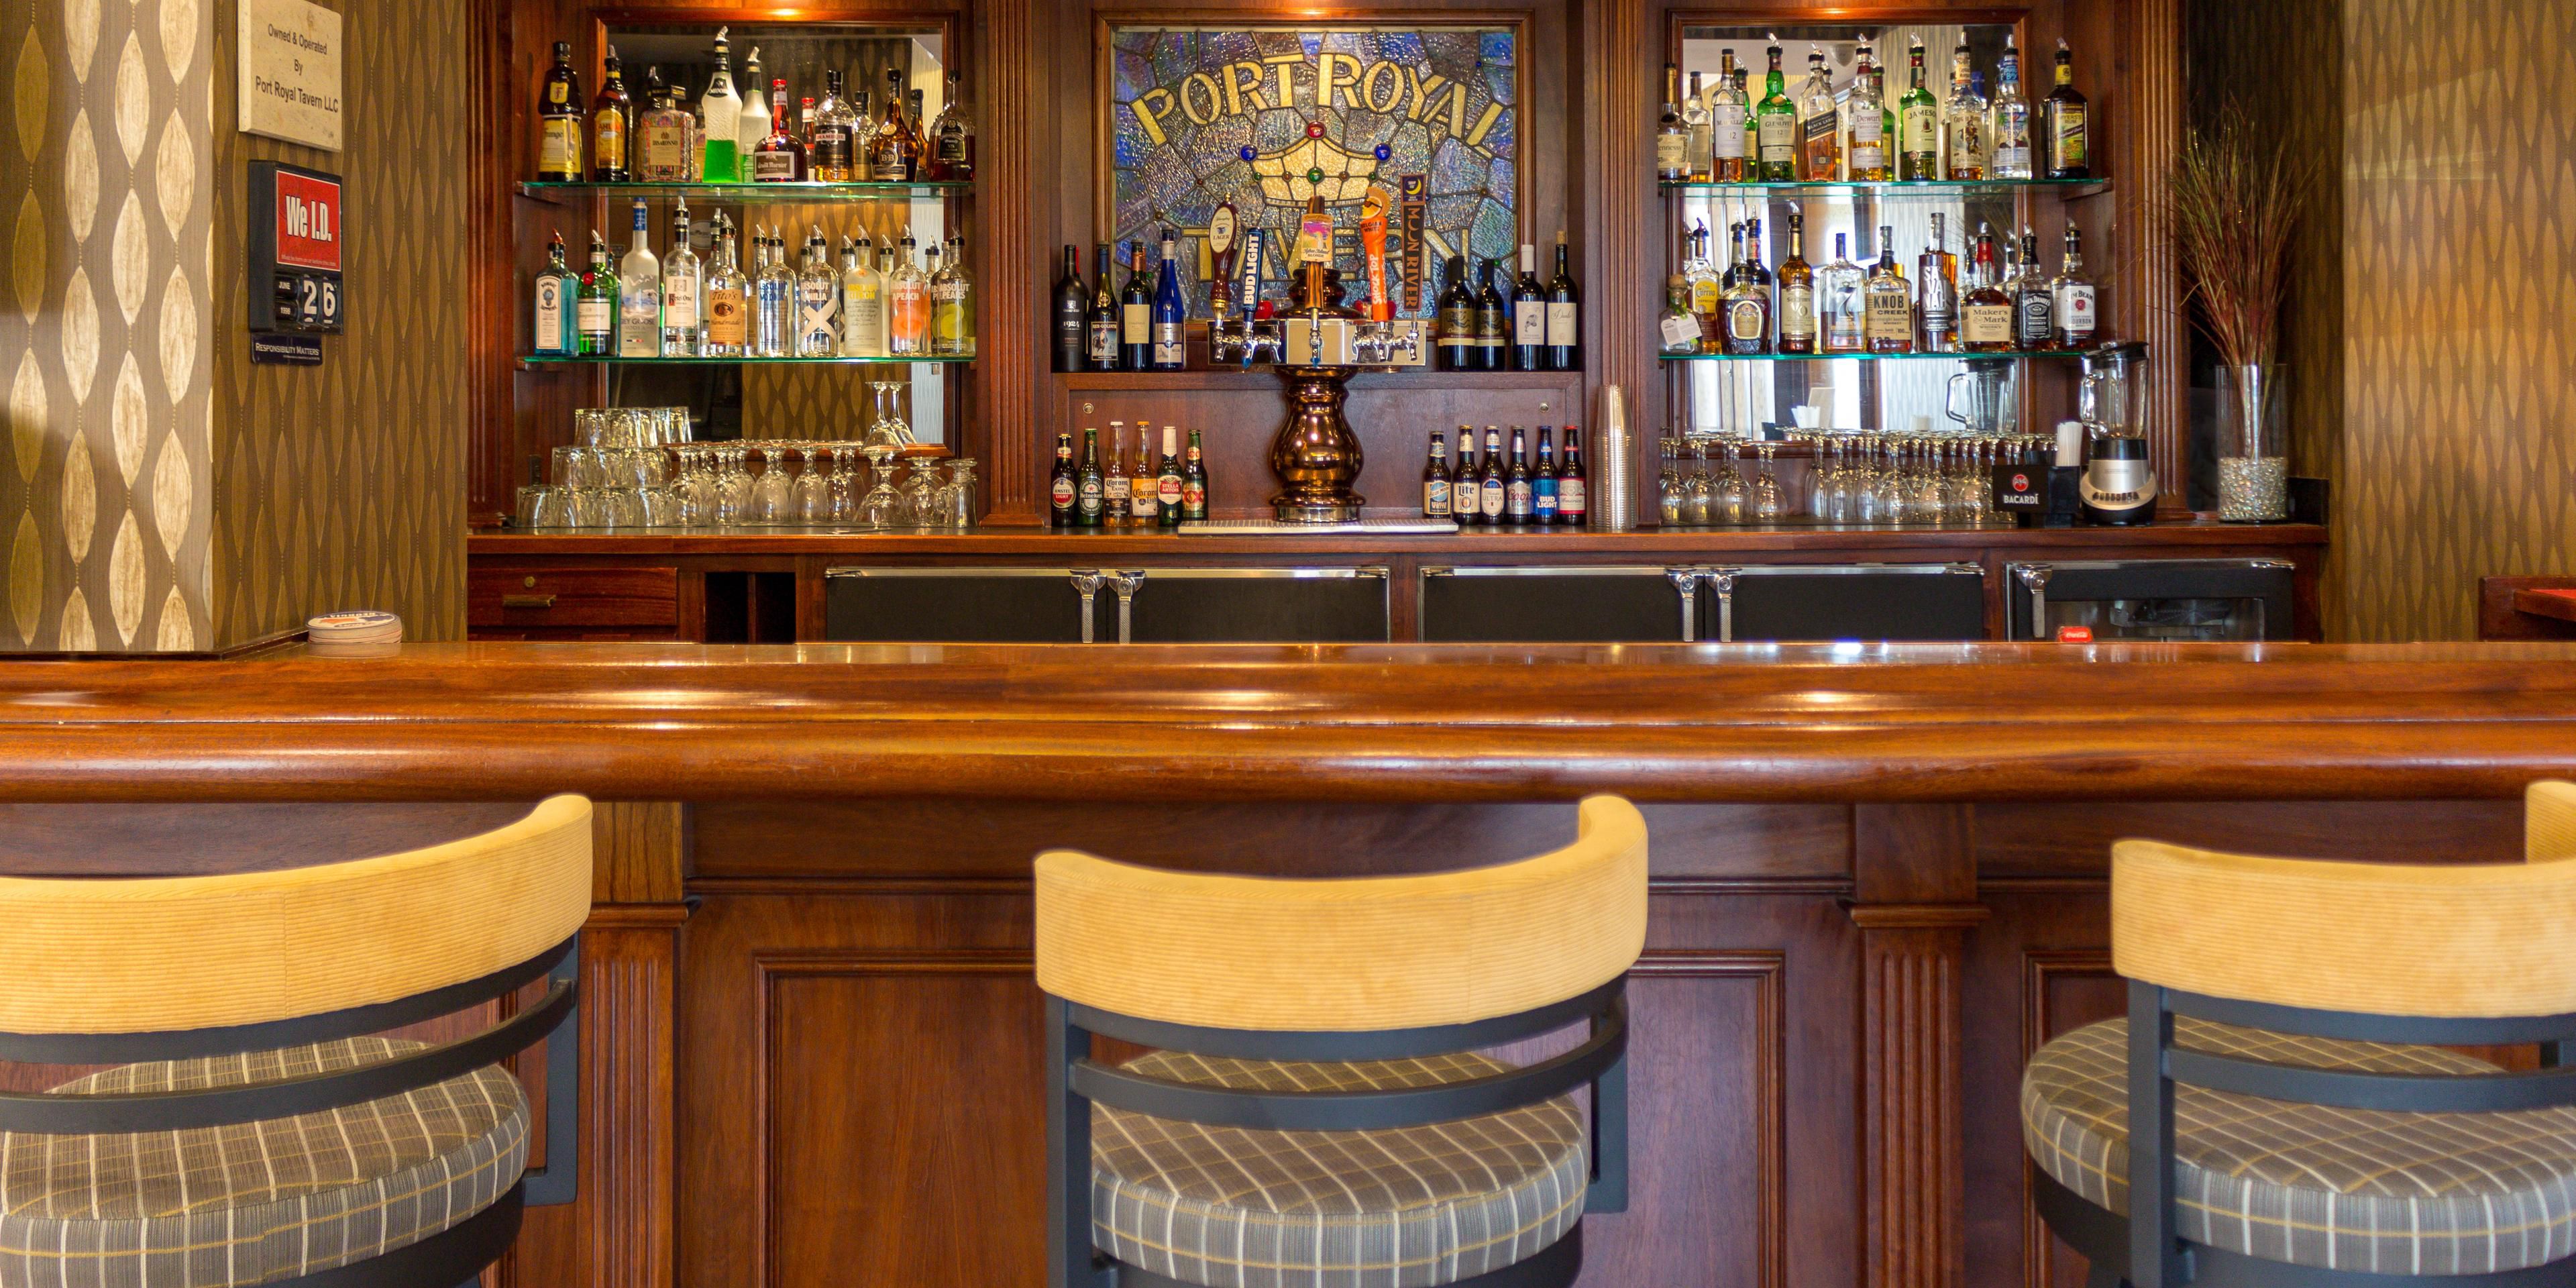 The Port Royal Tavern is right inside the Holiday Inn Express Savannah Historic District. Choose from a wide variety of creative cocktails, local craft beer and classic wines. You’re sure to find the ideal beverage to help unwind, relax and enjoy!